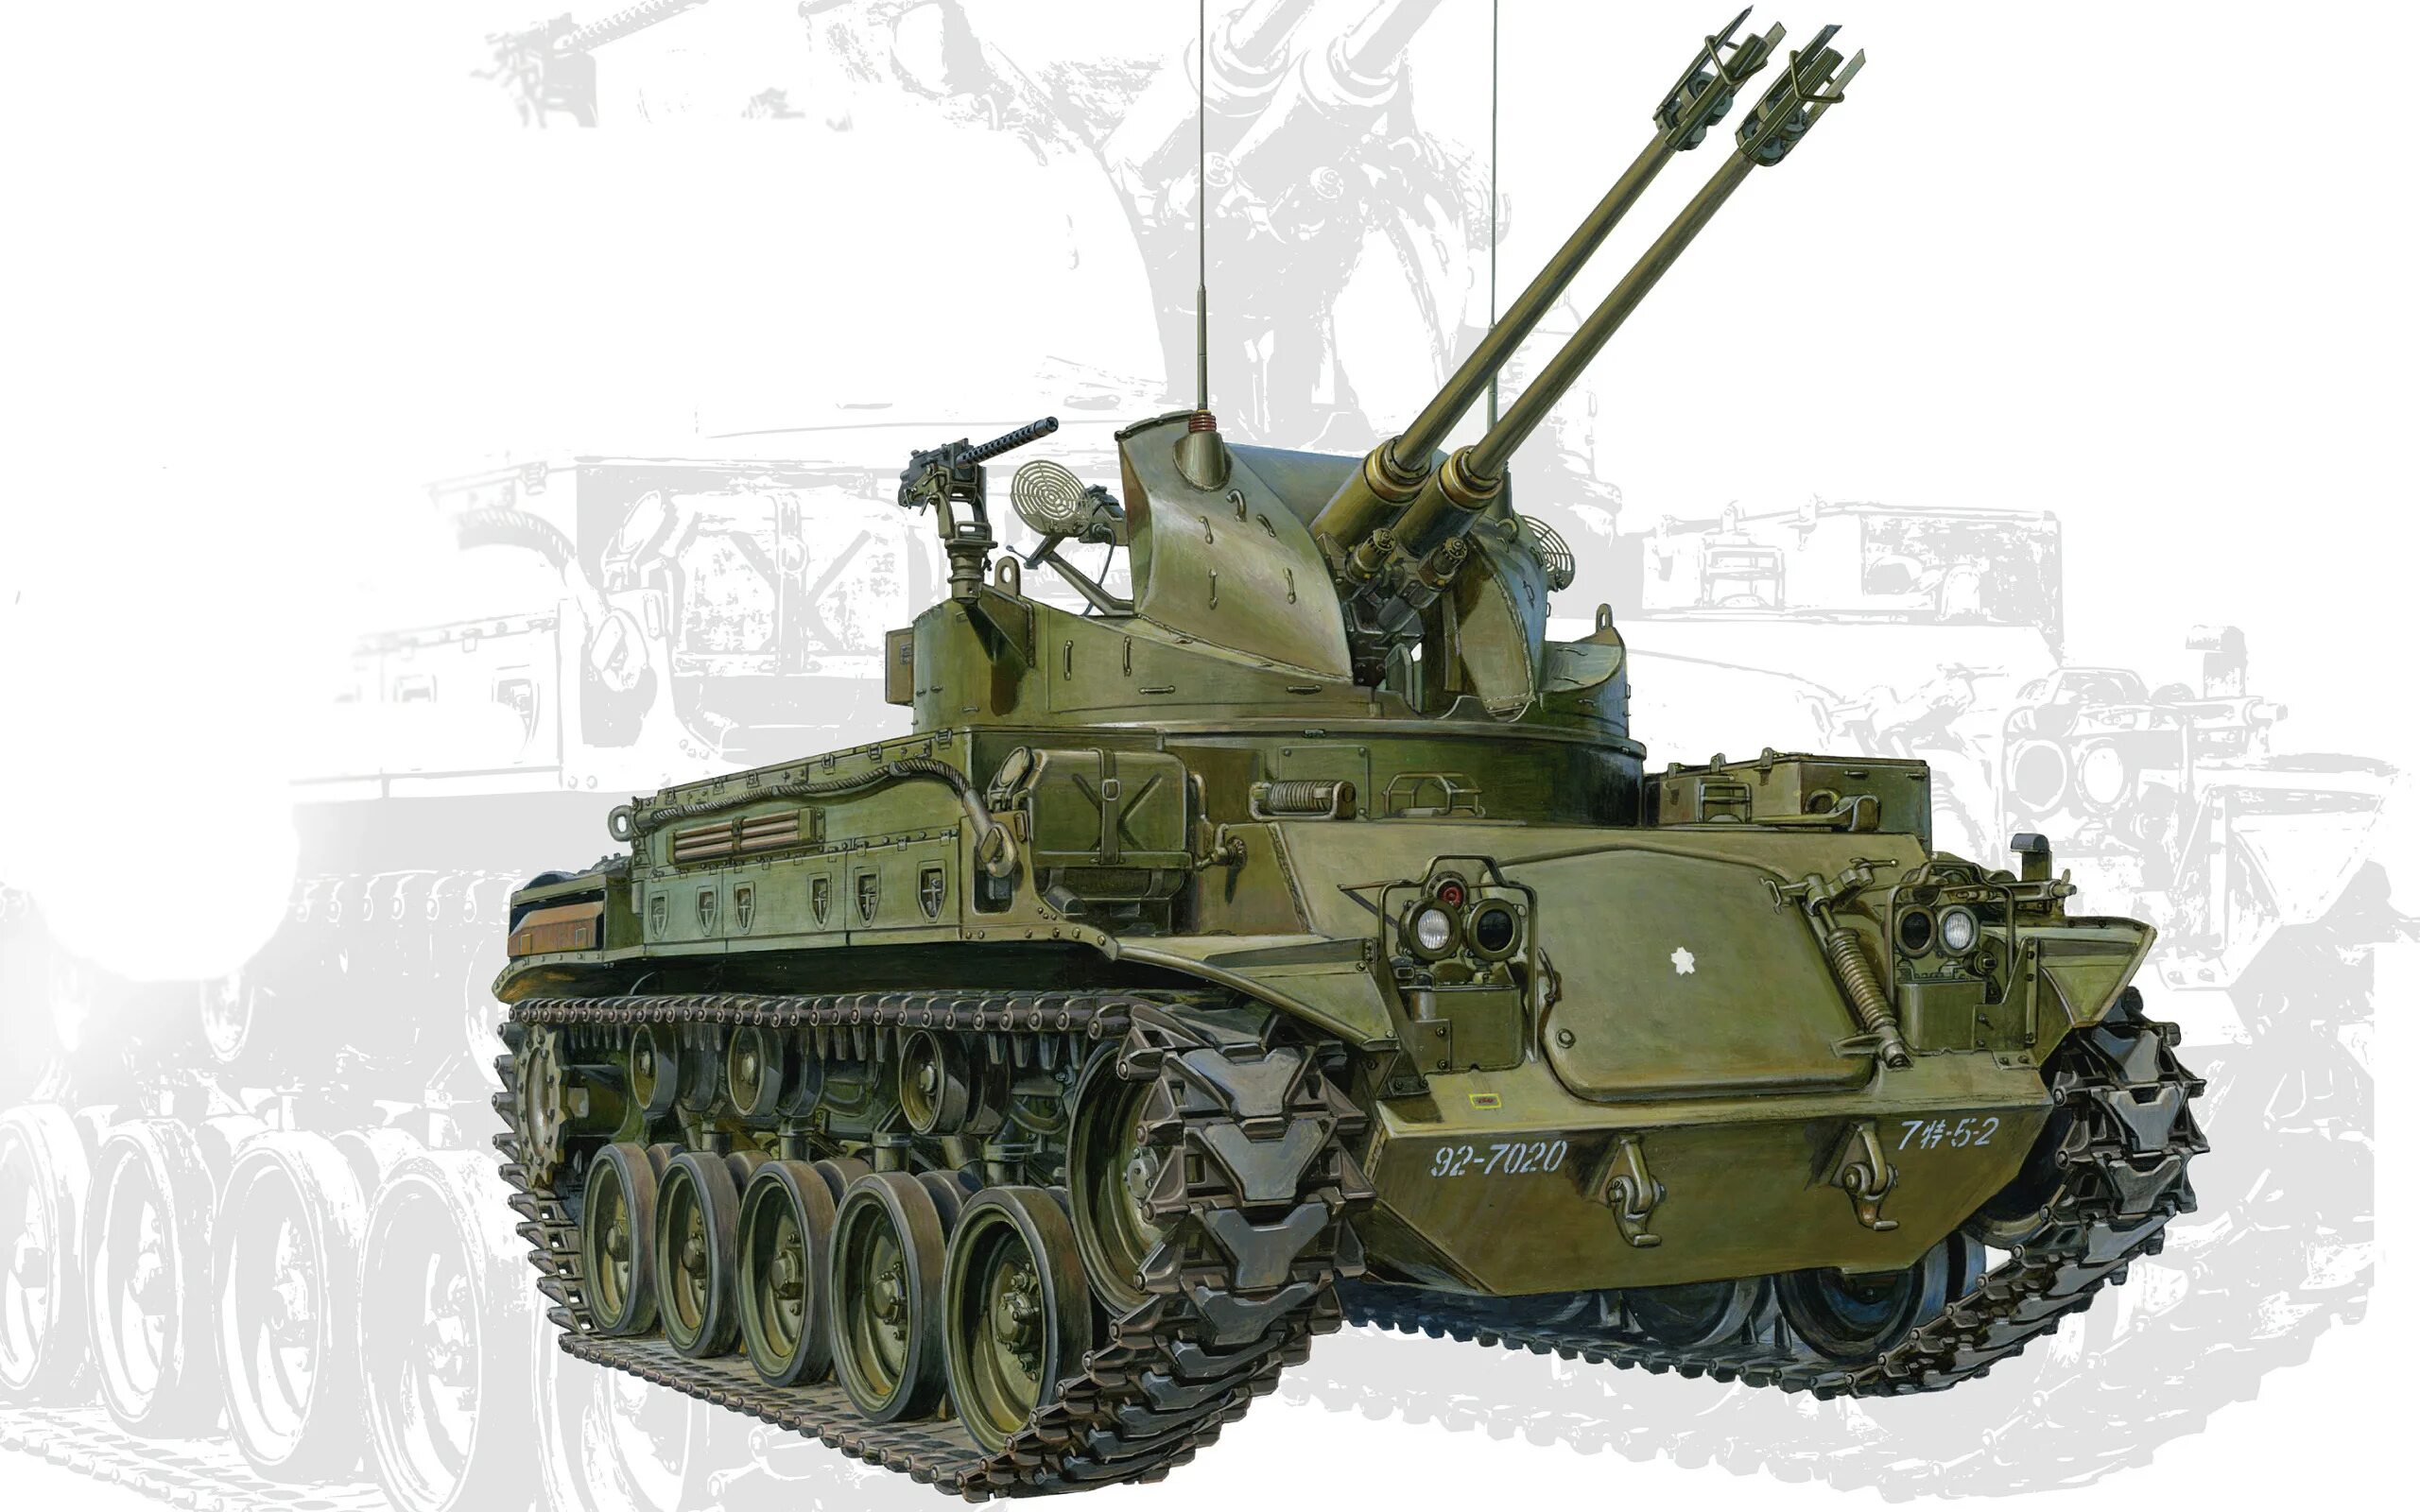 M42 ЗСУ. ЗСУ м42 Duster. M42a1 Duster Anti-aircraft Tank. М42 зенитка.